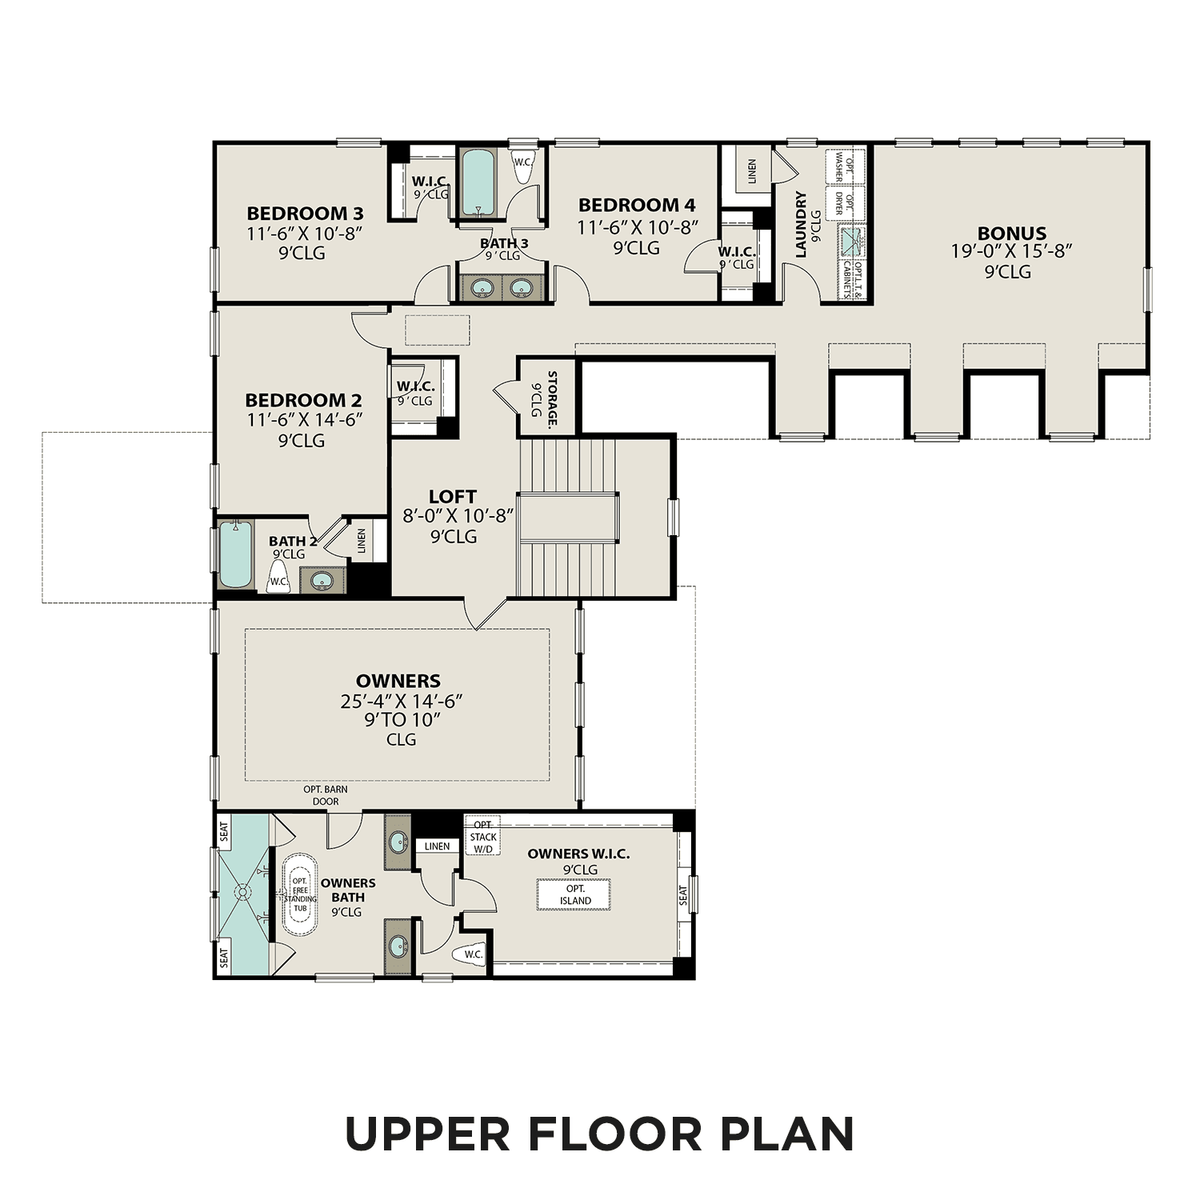 2 - The Alston A buildable floor plan layout in Davidson Homes' Shelton Square community.